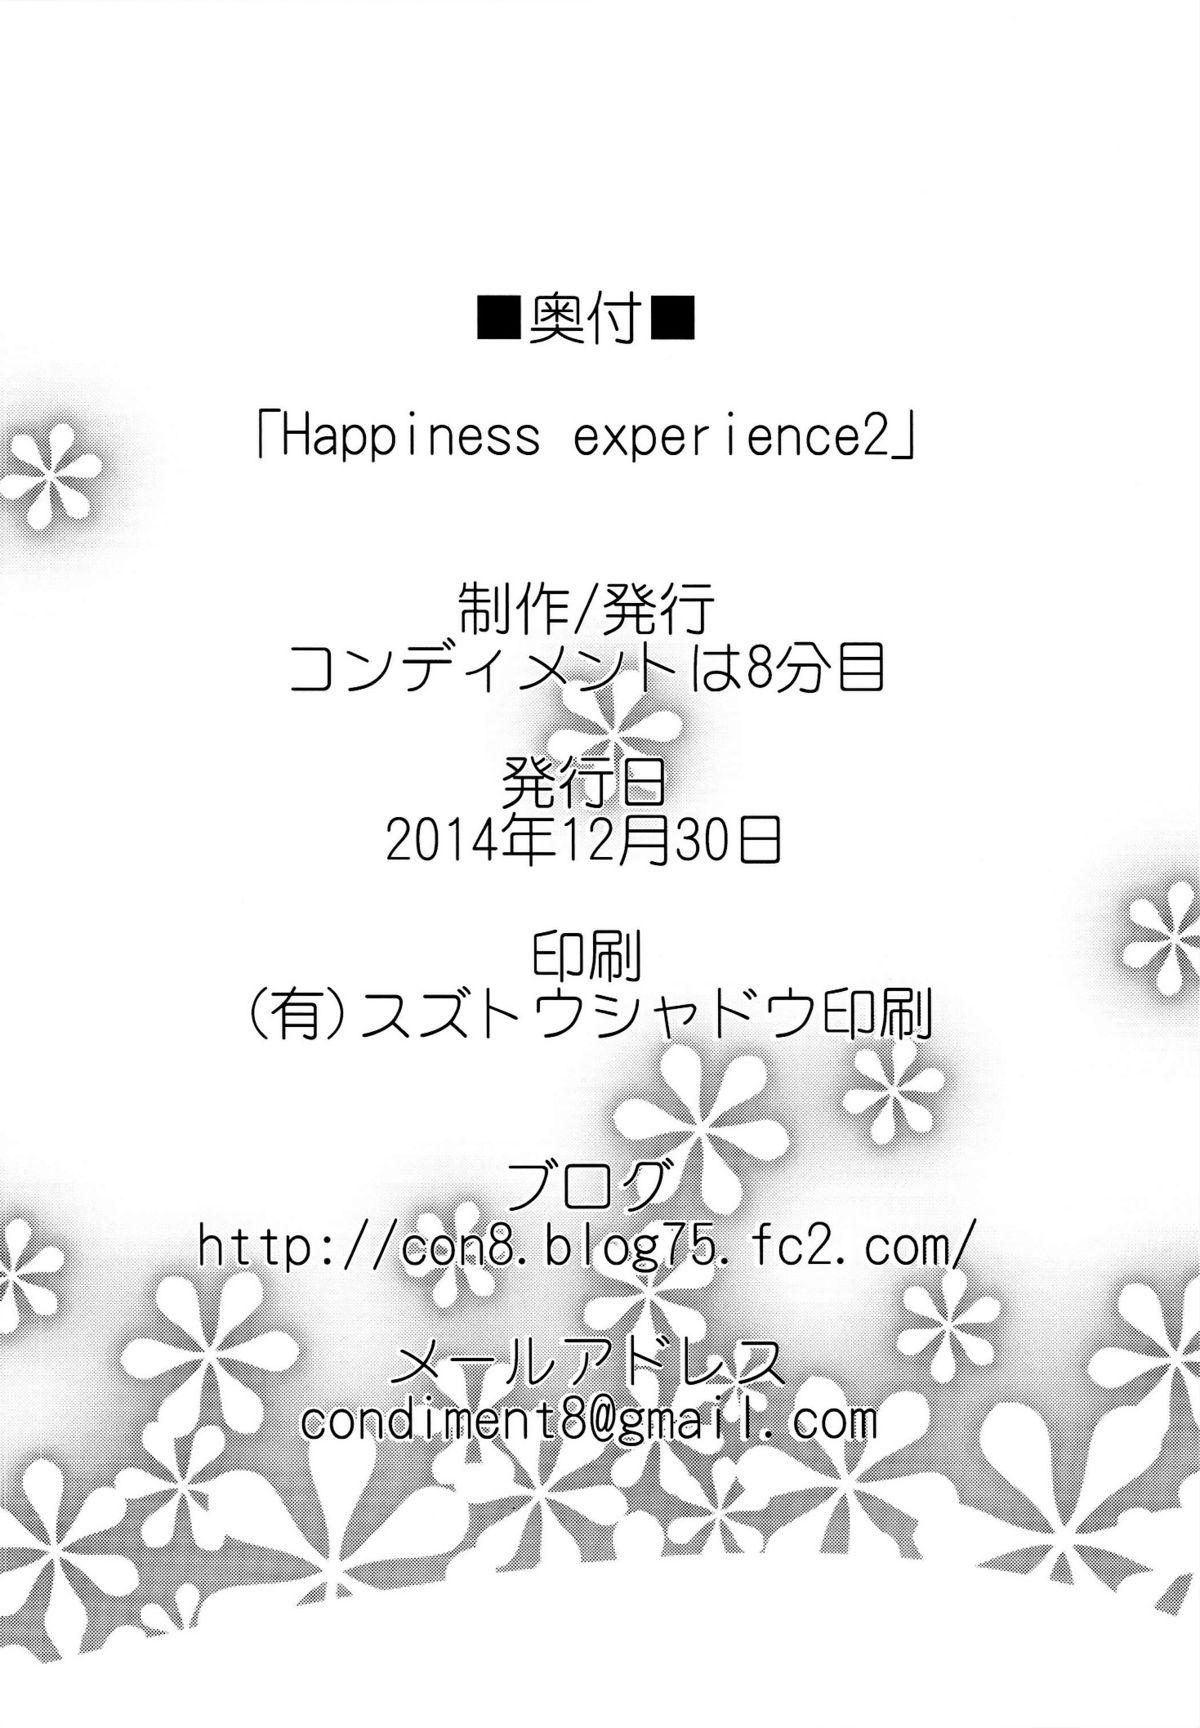 Happiness experience2 29